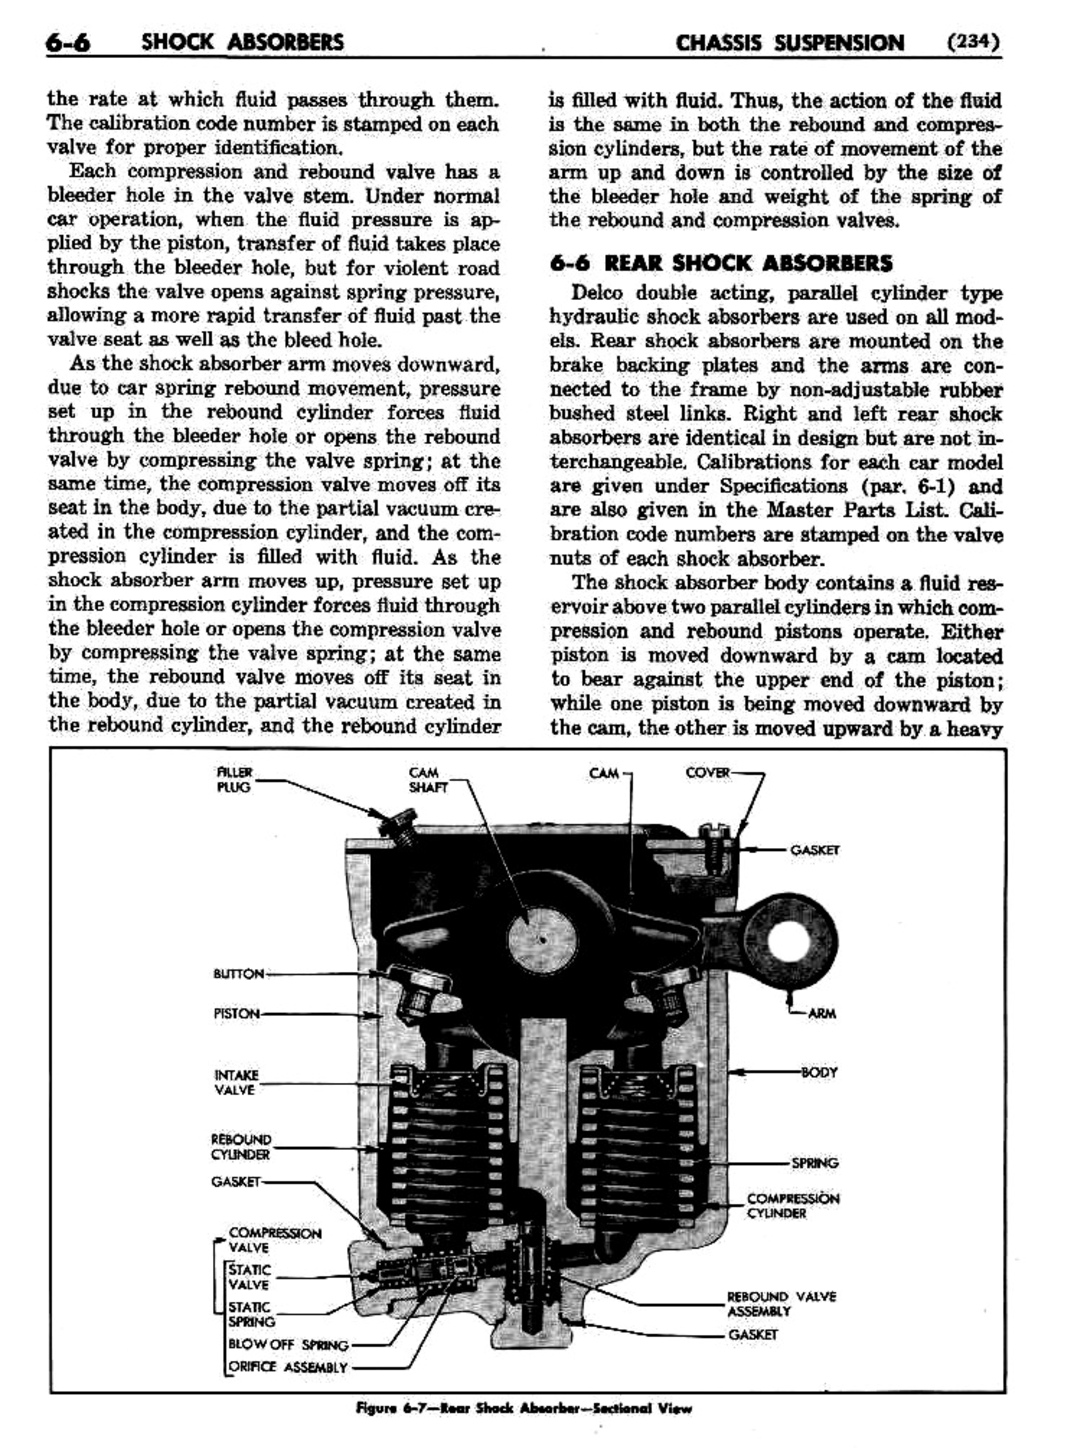 n_07 1951 Buick Shop Manual - Chassis Suspension-006-006.jpg